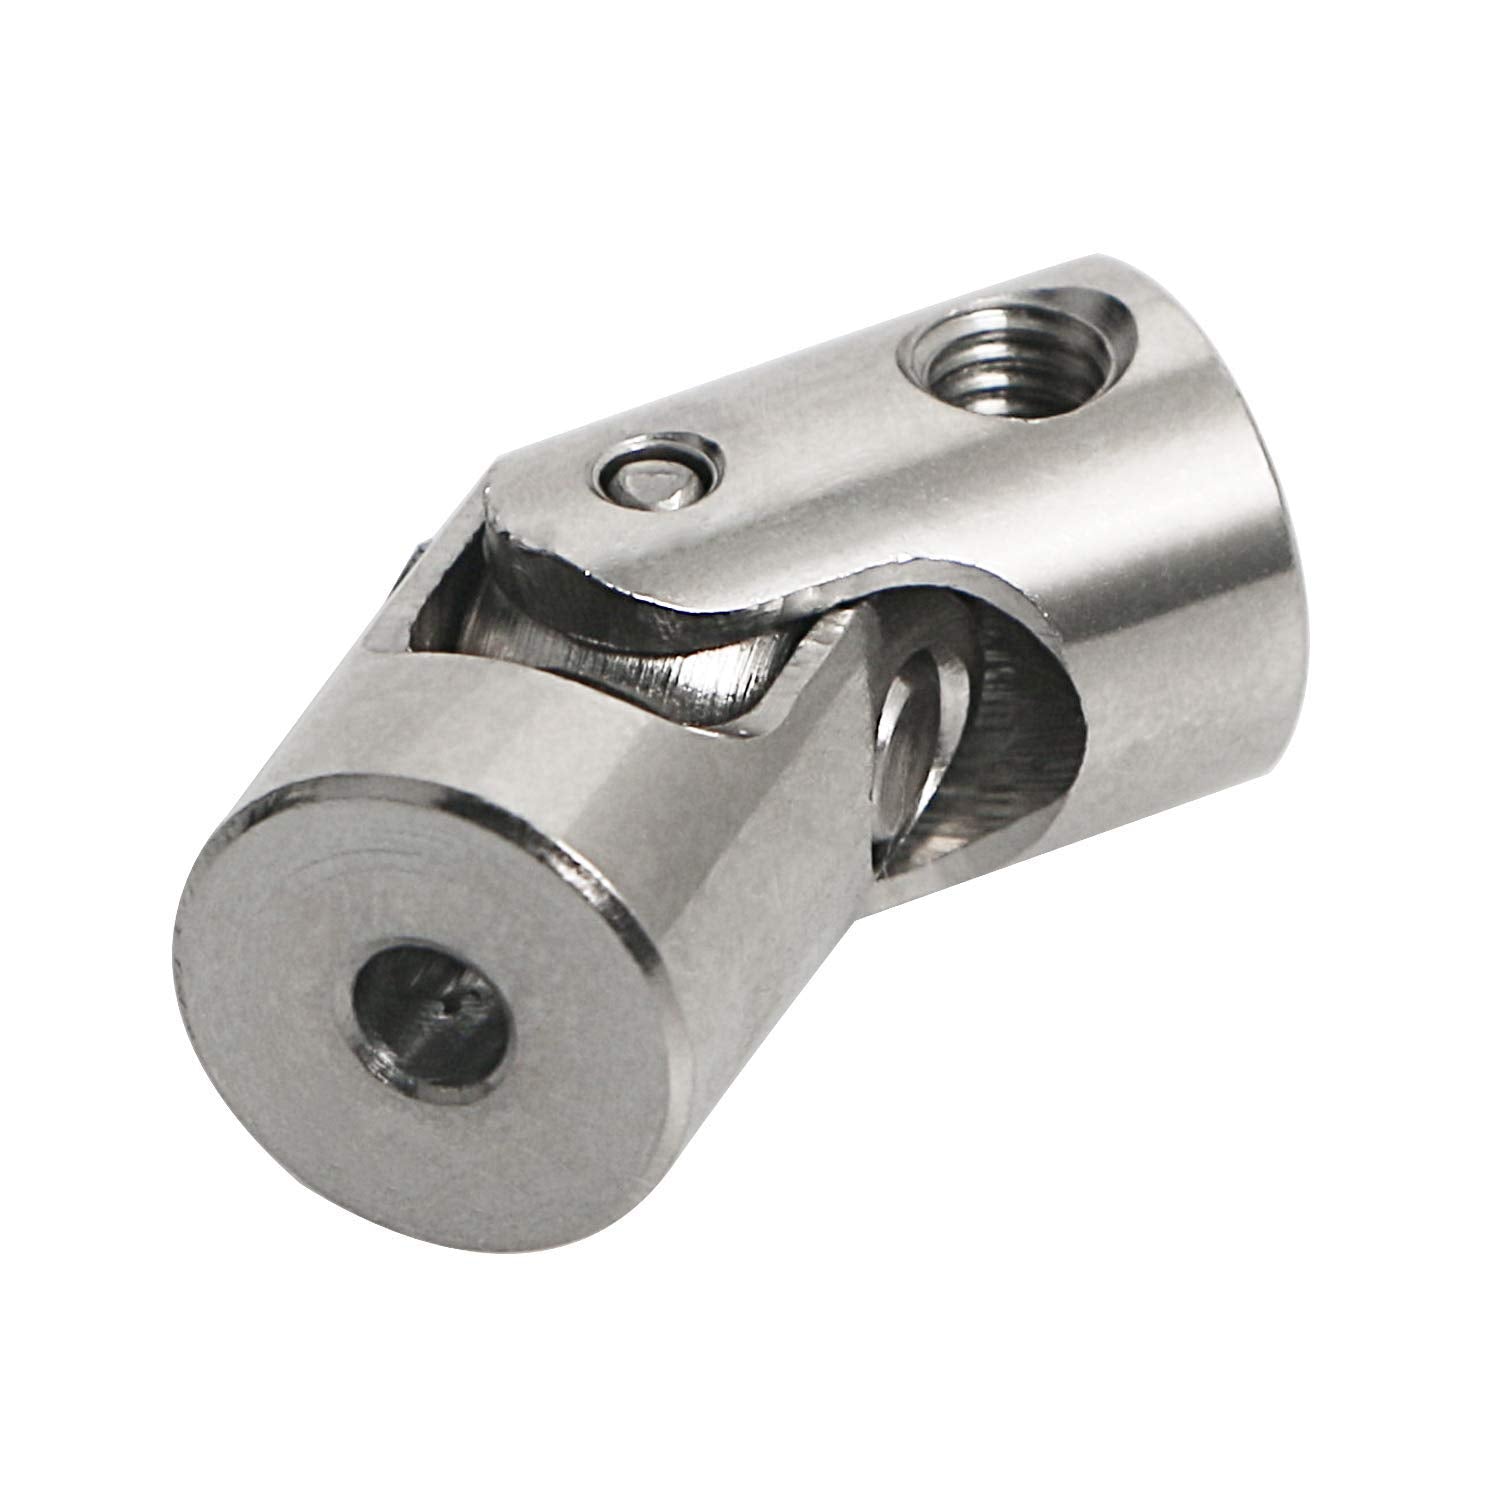 Metal Coupling Unit for 4mm x 3mm Boats